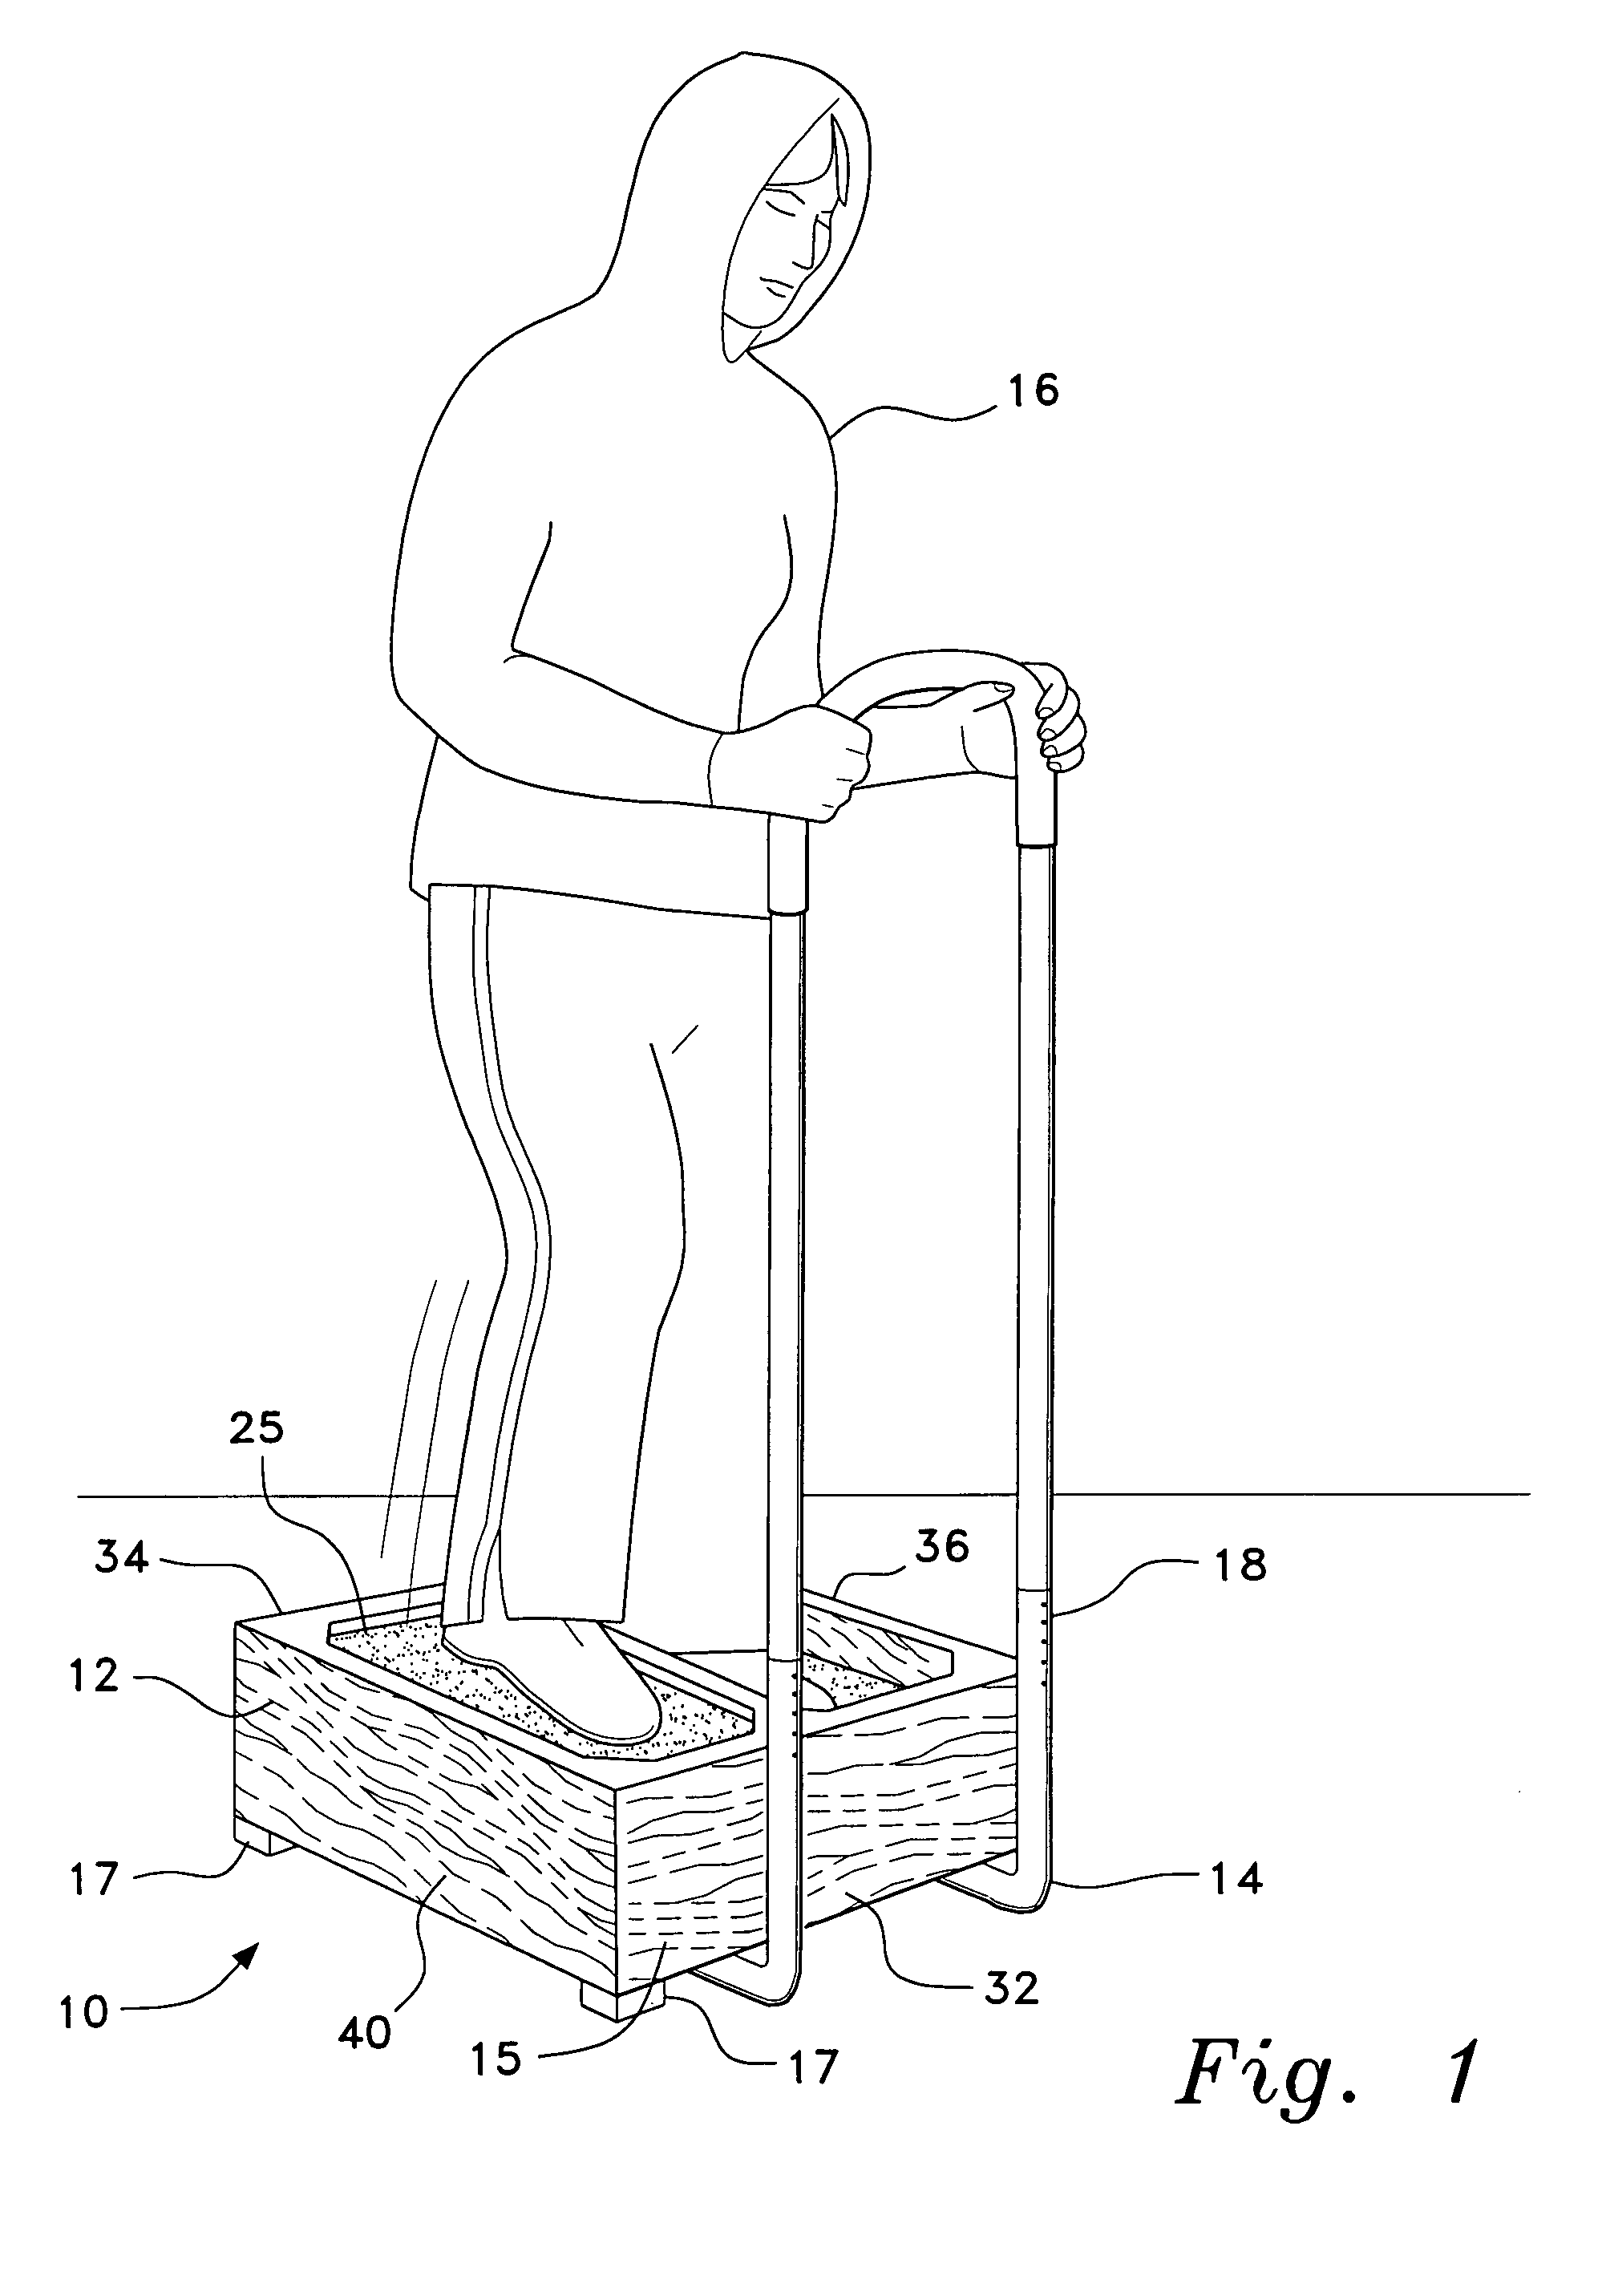 Exercise device for lower body